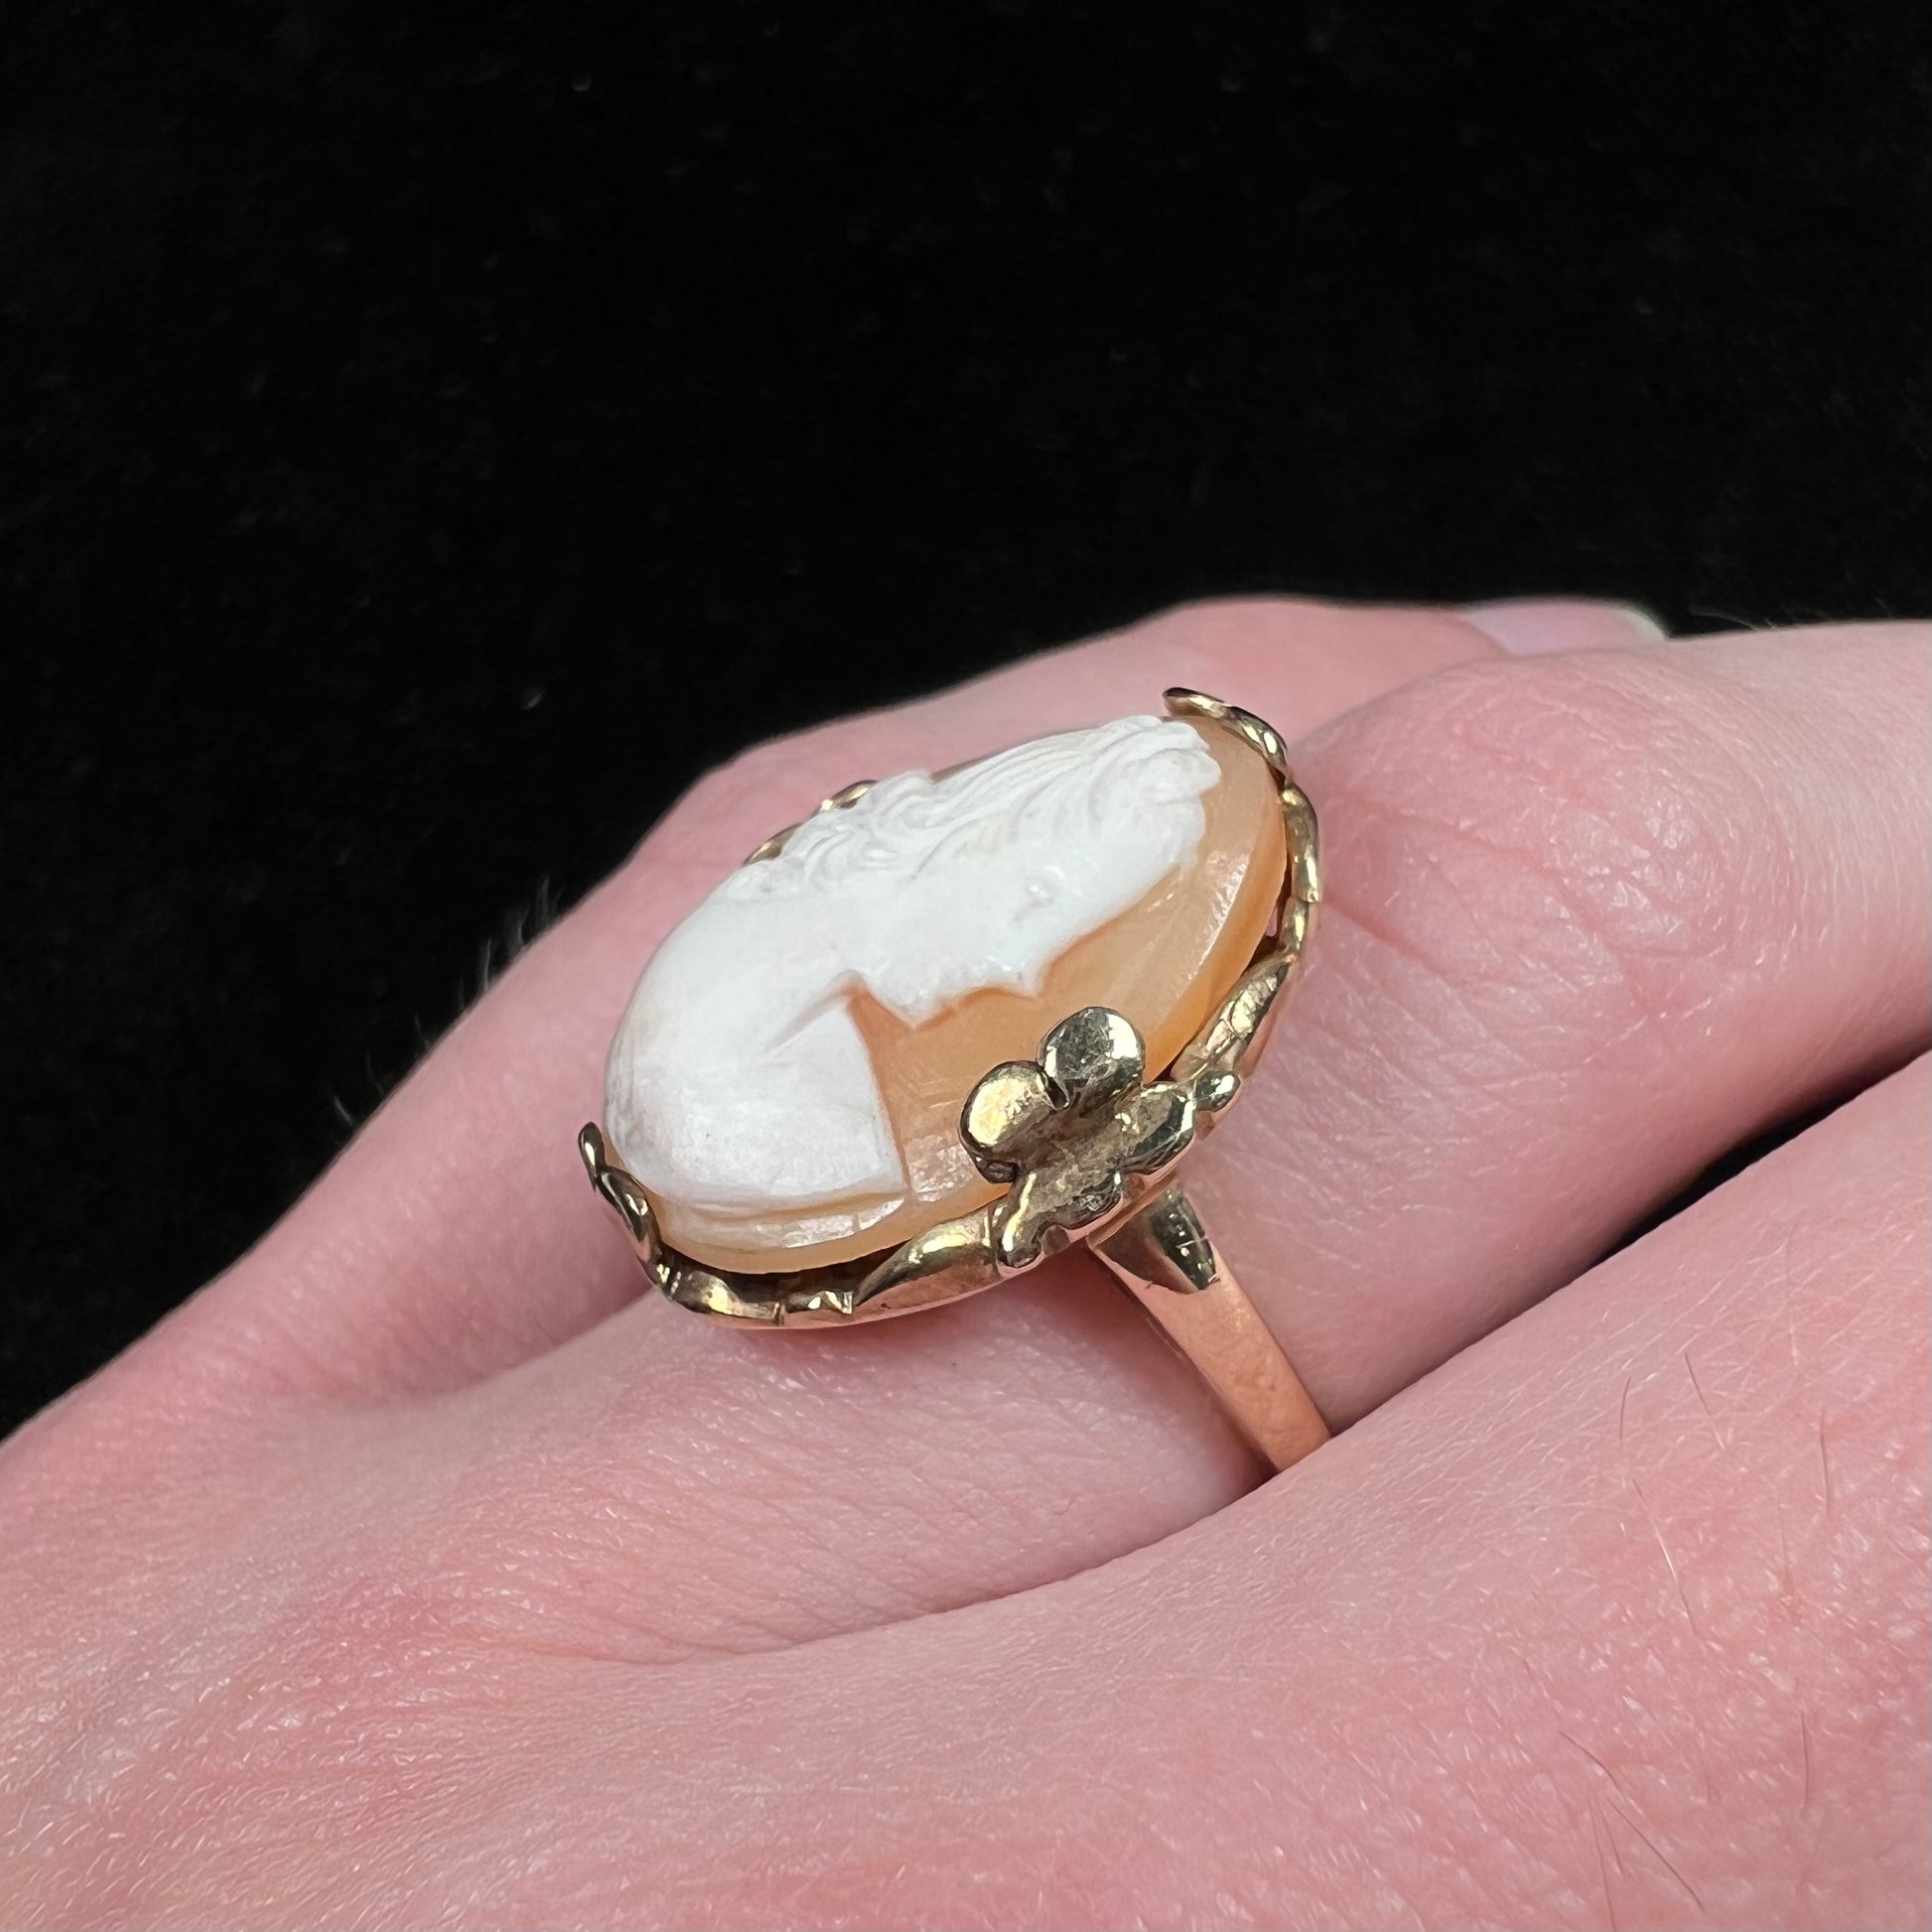 An antique yellow gold and agate cameo ring.